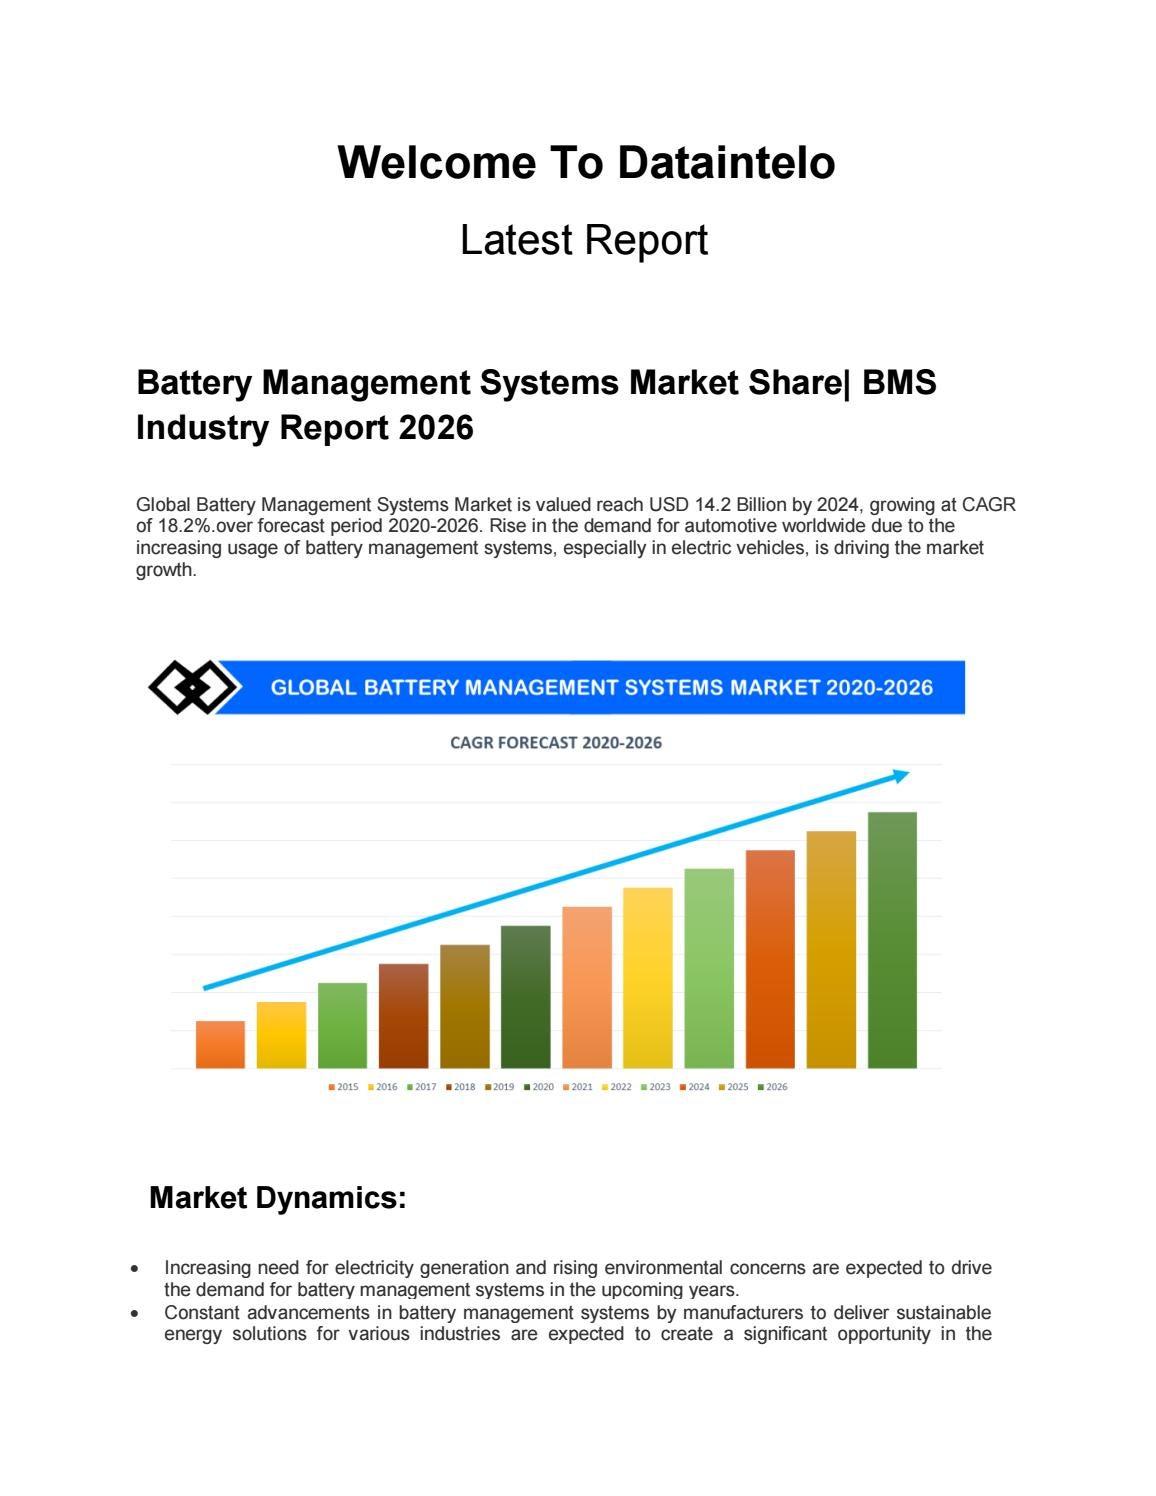 Battery Management System Market Fascinating Business Growth Tactics By 2029 | Leading Players Are Renesas Electronics Corporation., Johnson Matthey, Elithion, BMS PowerSafe